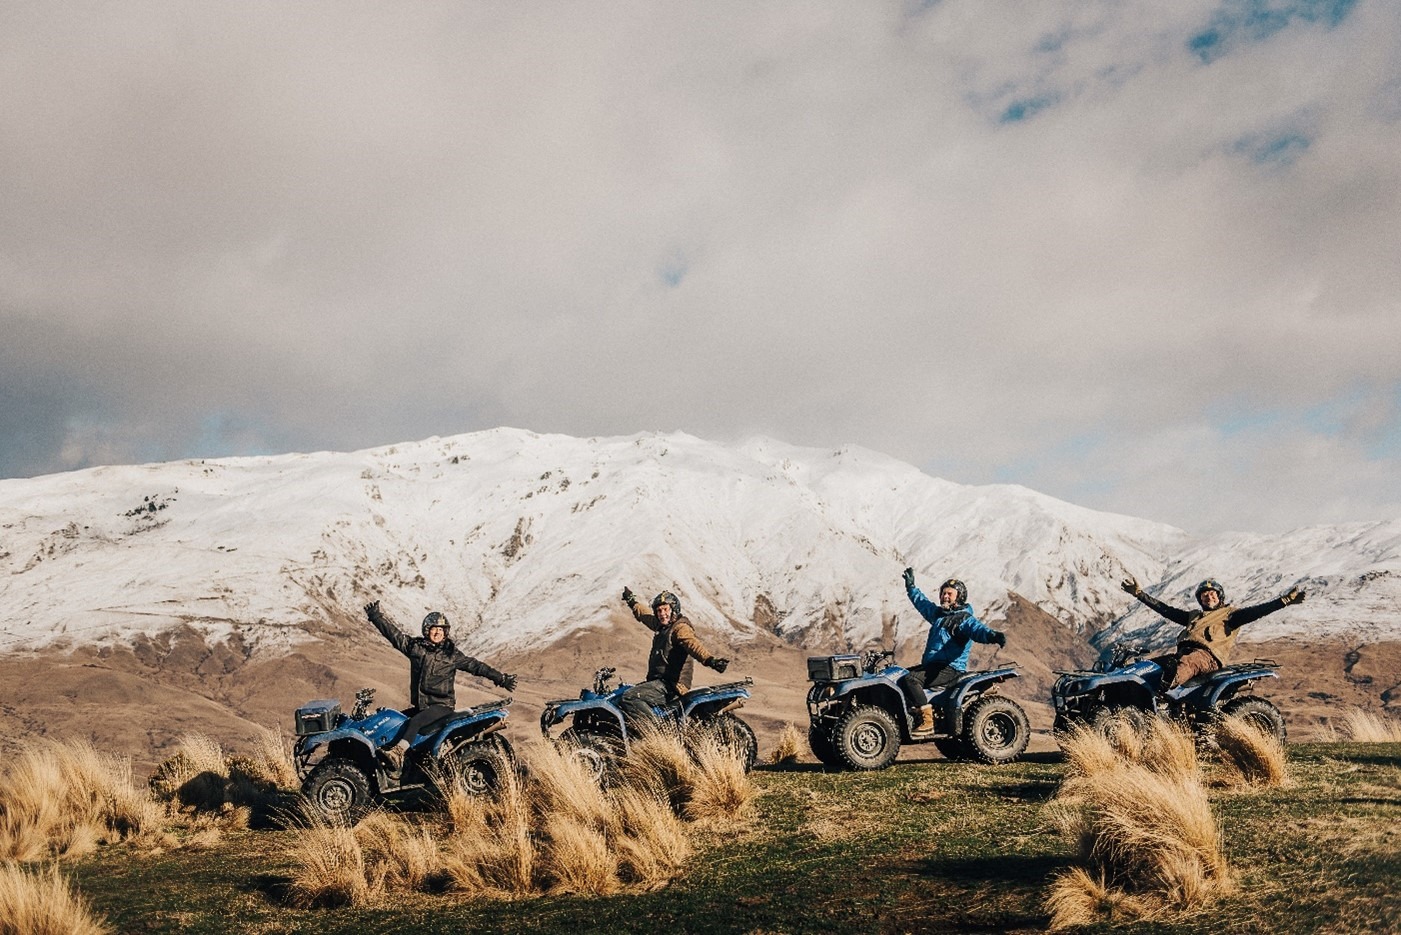 Riding the Rugged: A Quadbike Adventure in Cardrona’s Wild Heart with The Cardrona Horse Riding & 4×4 ATVs